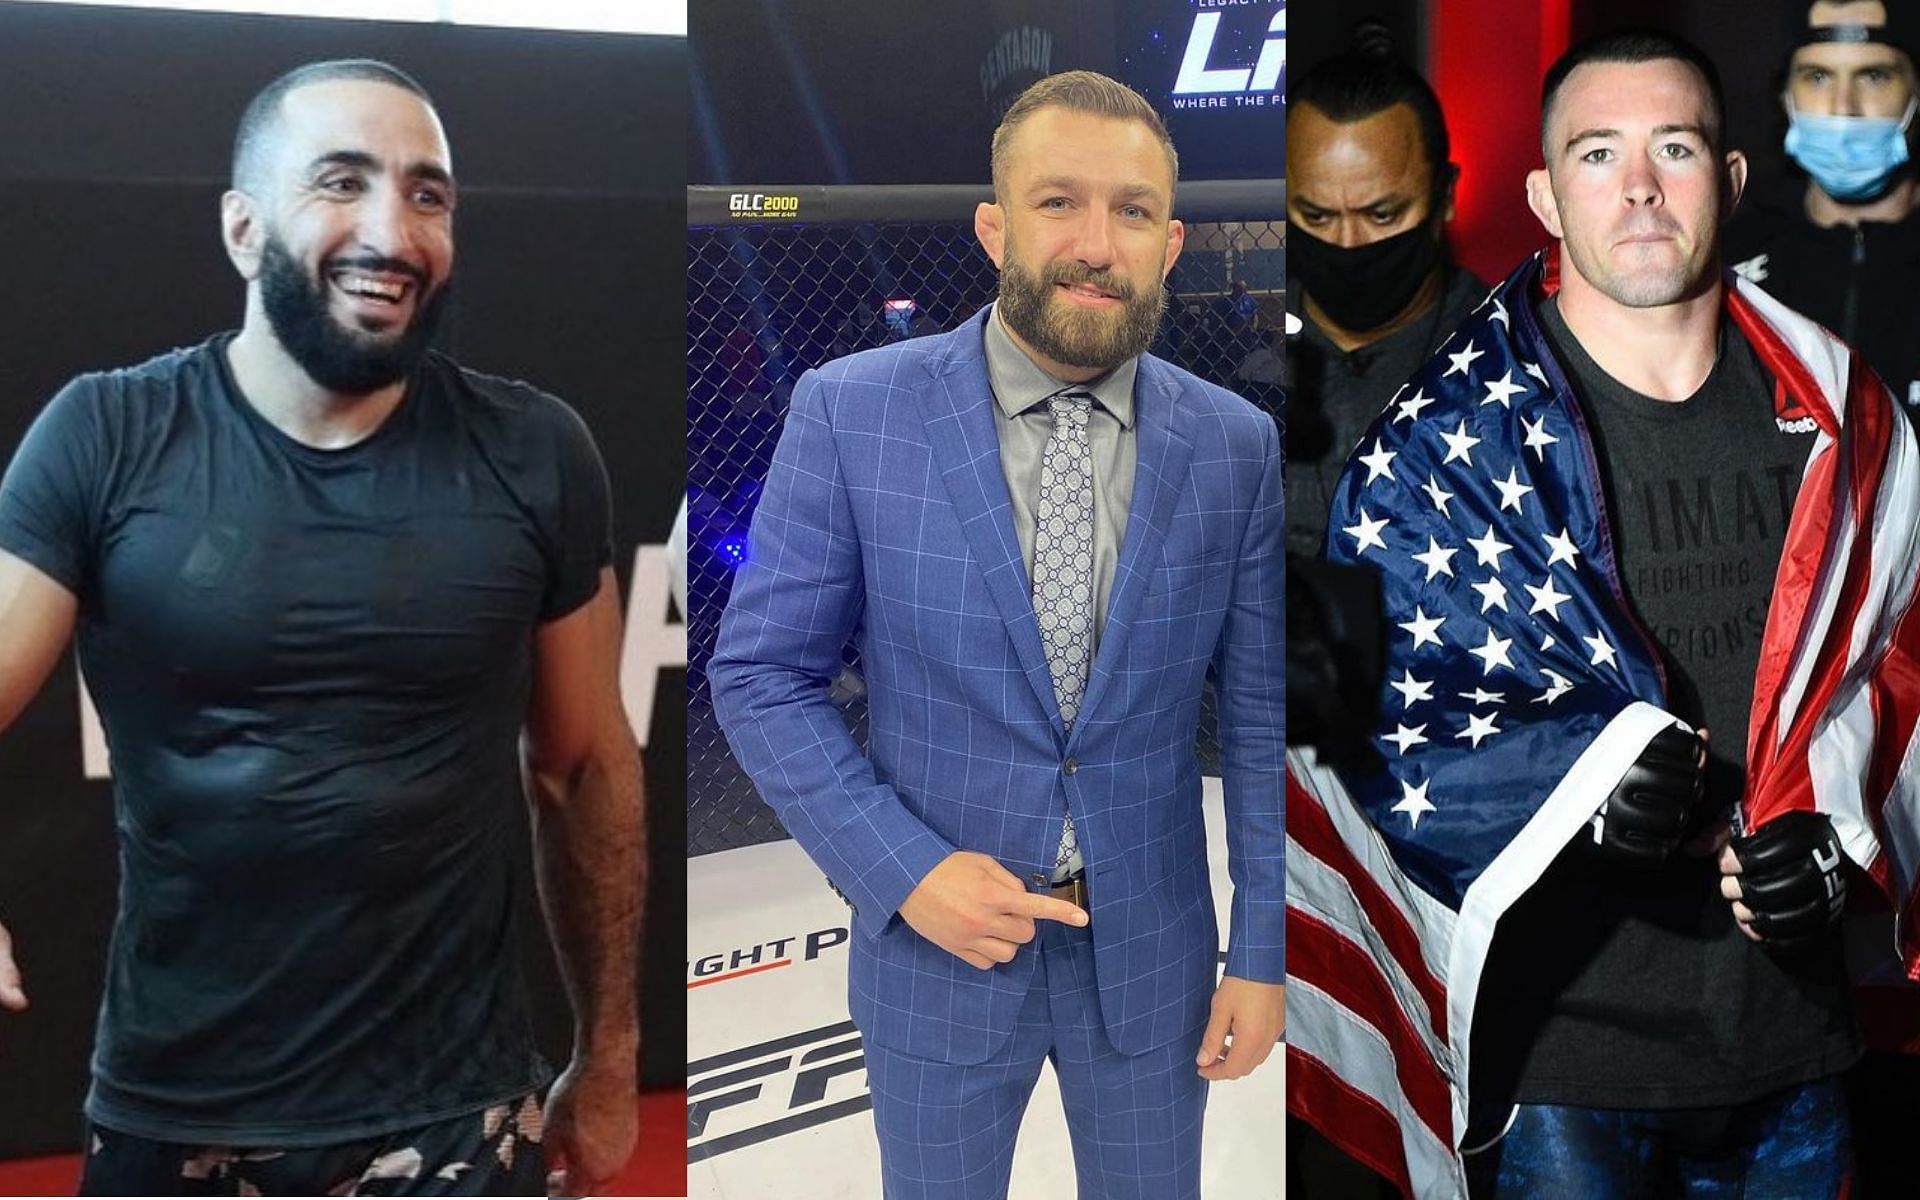 (From left to right) Belal Muhammad, Michael Chiesa and Colby Covington [Image Courtesy: @bullyb170, @miekmav22 and @colbycovmma on Instagram]